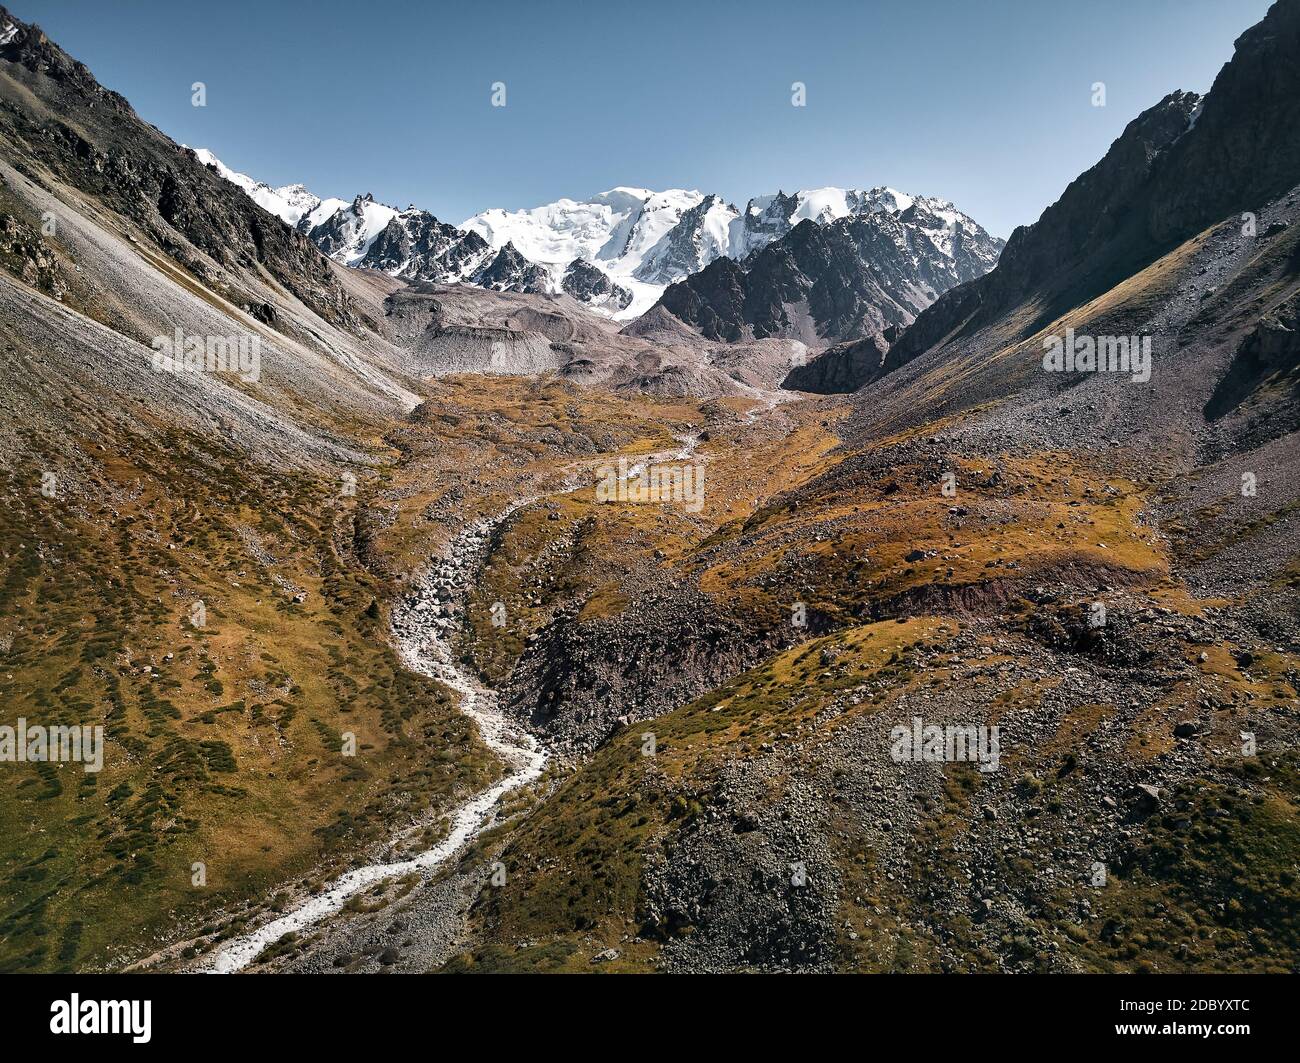 Aerial view of the river in the mountain valley in Tien Shan mountains in Almaty Kazakhstan. Picture taken by drone Stock Photo